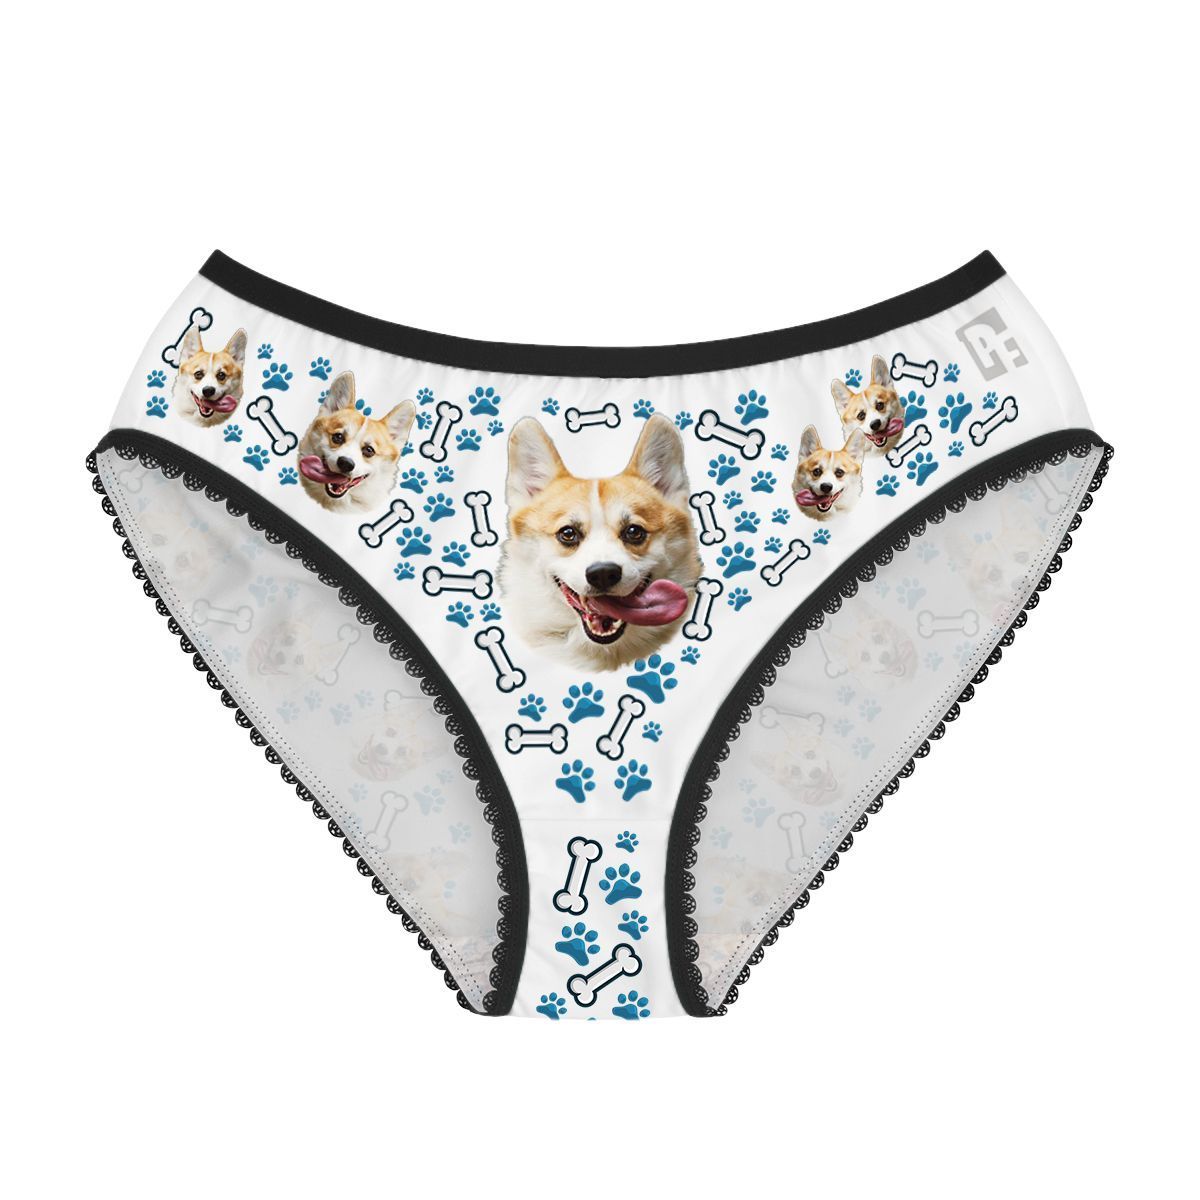 Blue Dog women's underwear briefs personalized with photo printed on them